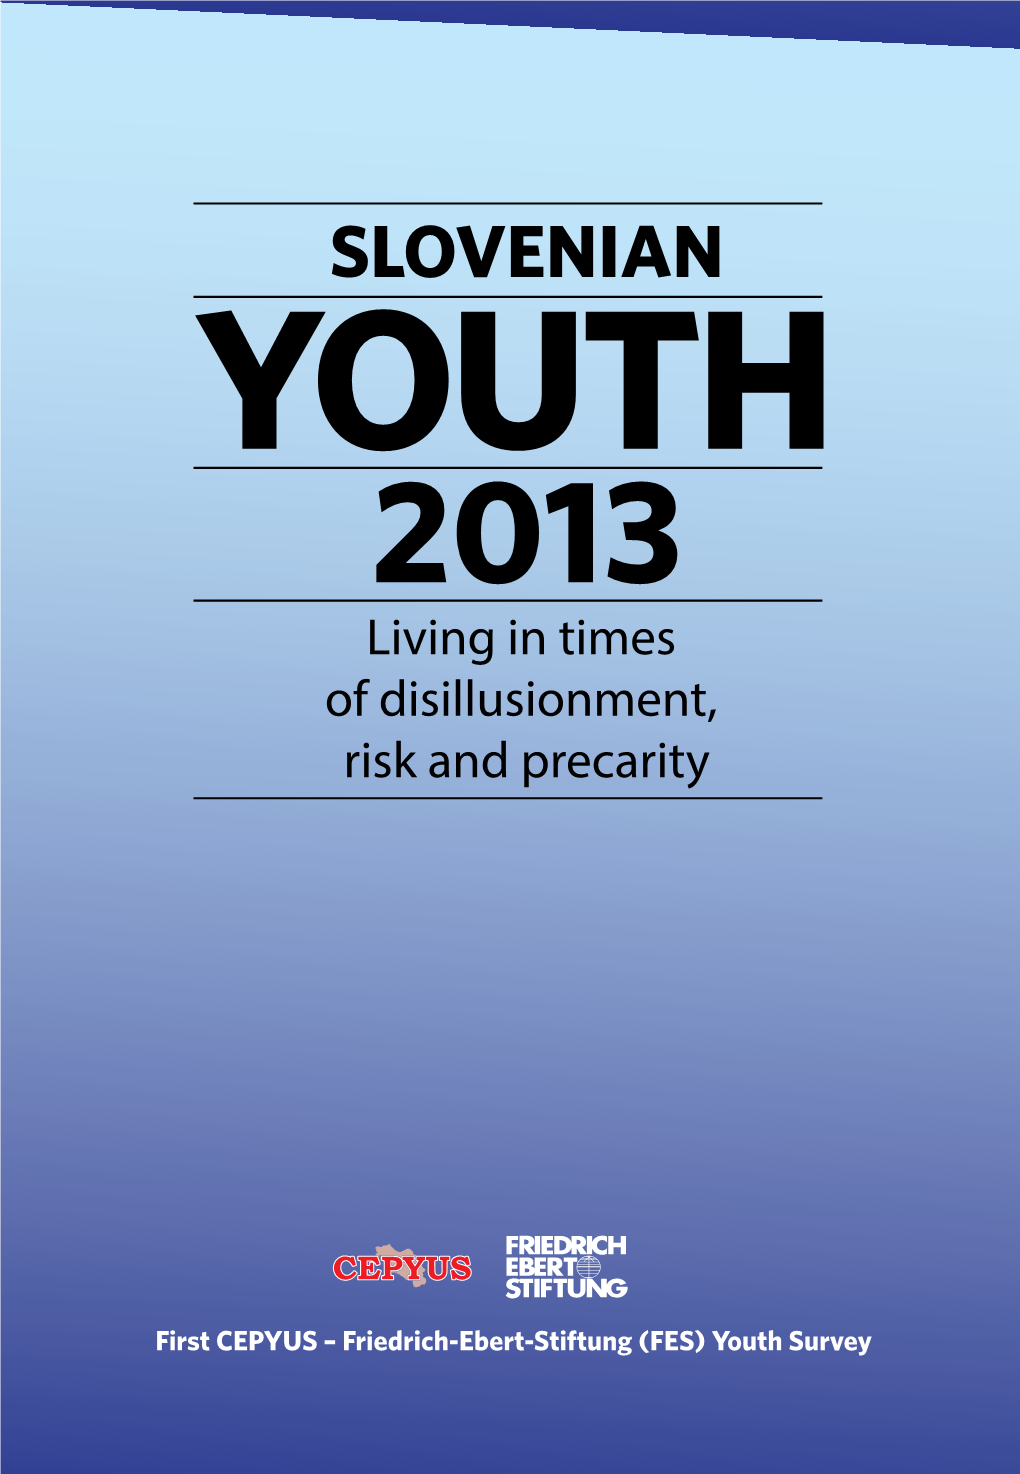 Slovenian Youth 2013: Living in Times of Disillusionment, Risk and Precarity